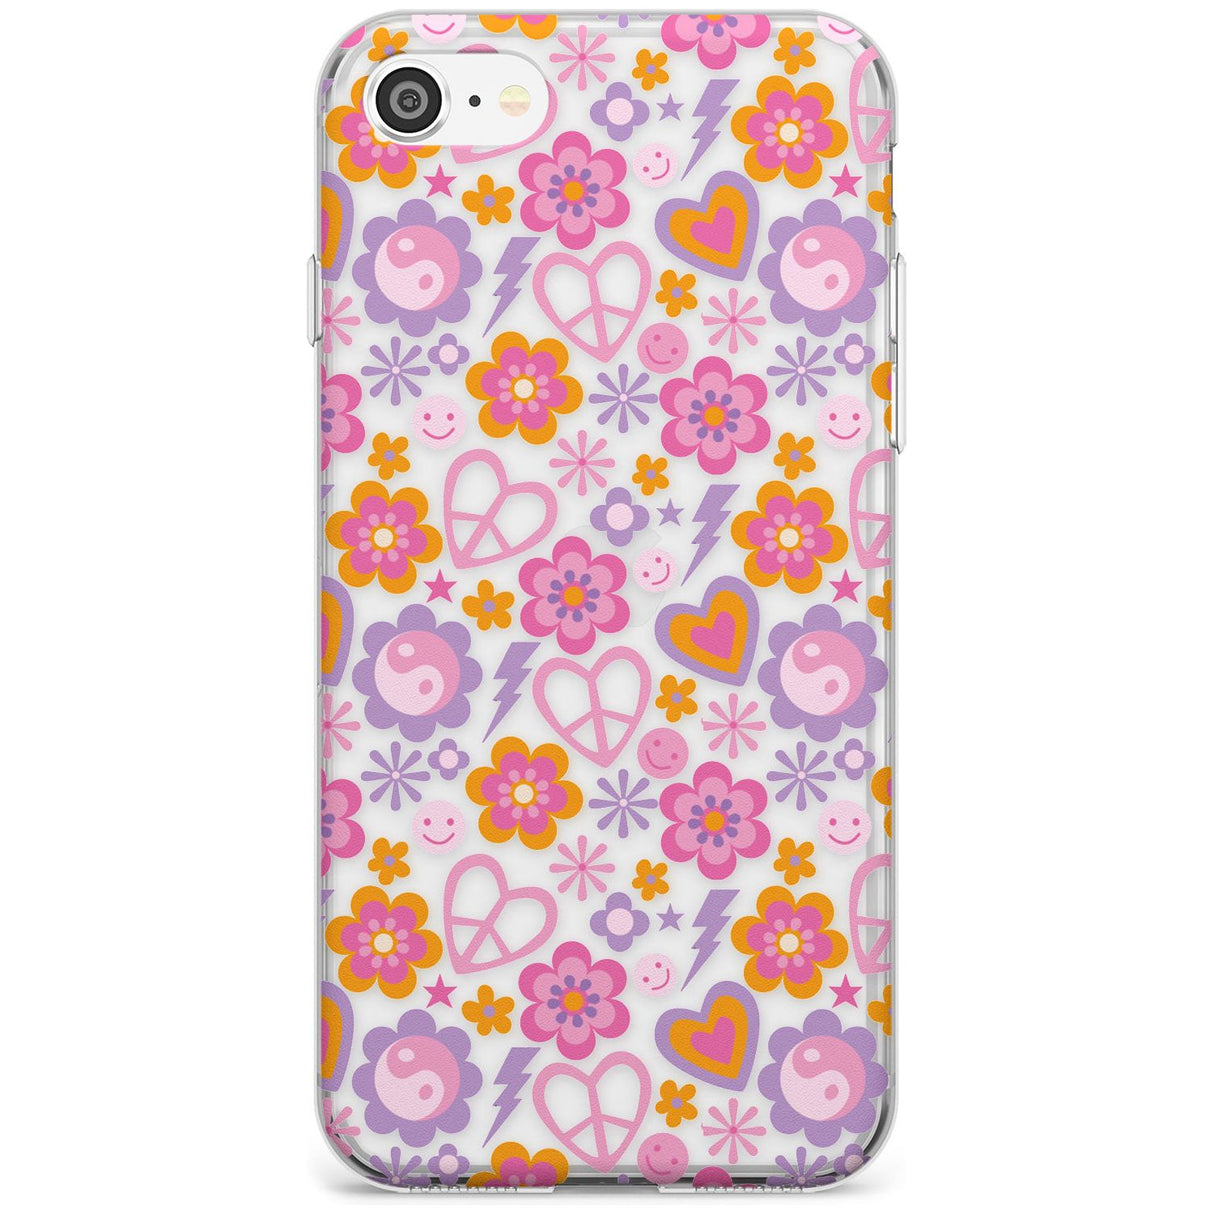 Peace, Love and Flowers Pattern Slim TPU Phone Case for iPhone SE 8 7 Plus